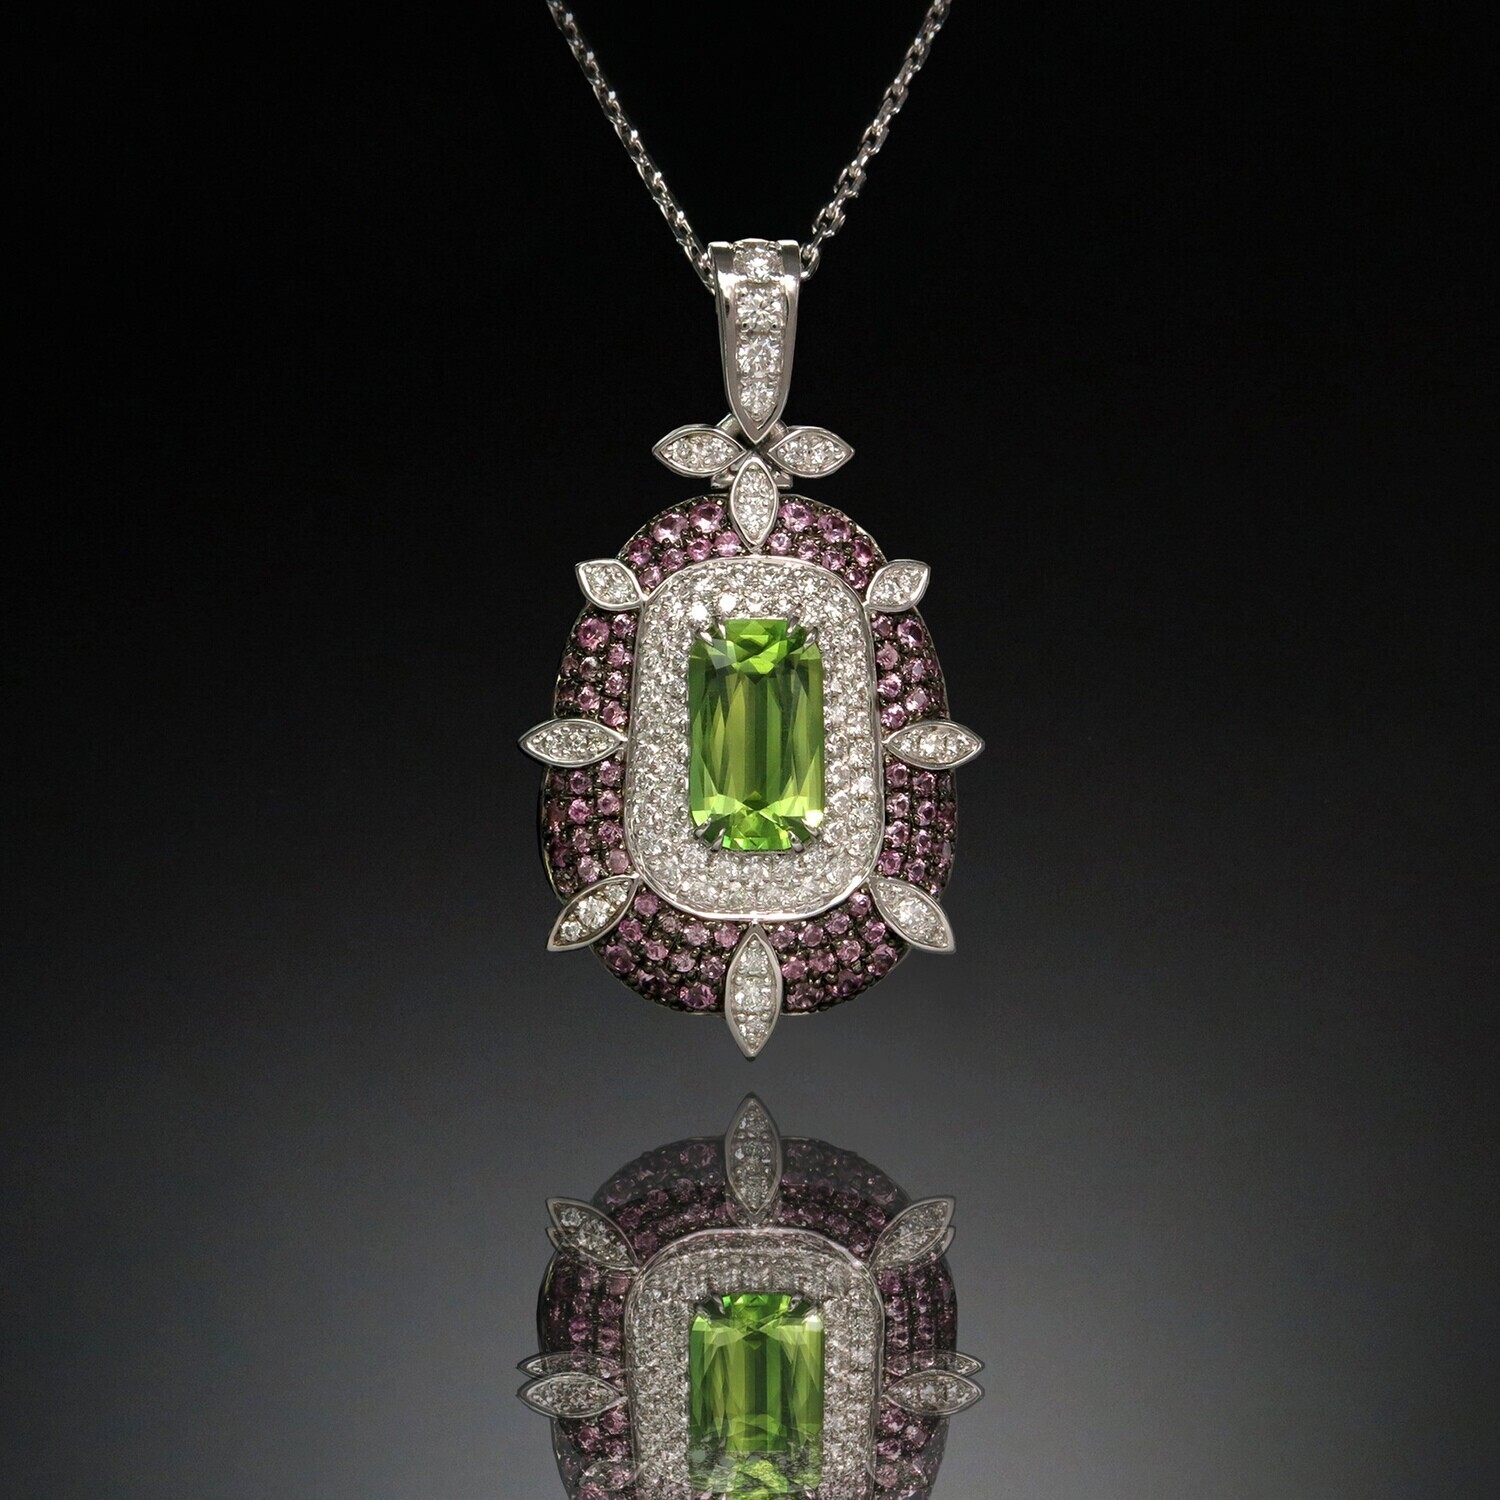 14K Gold Pendant with Peridot, Diamonds and Sapphires, VH004